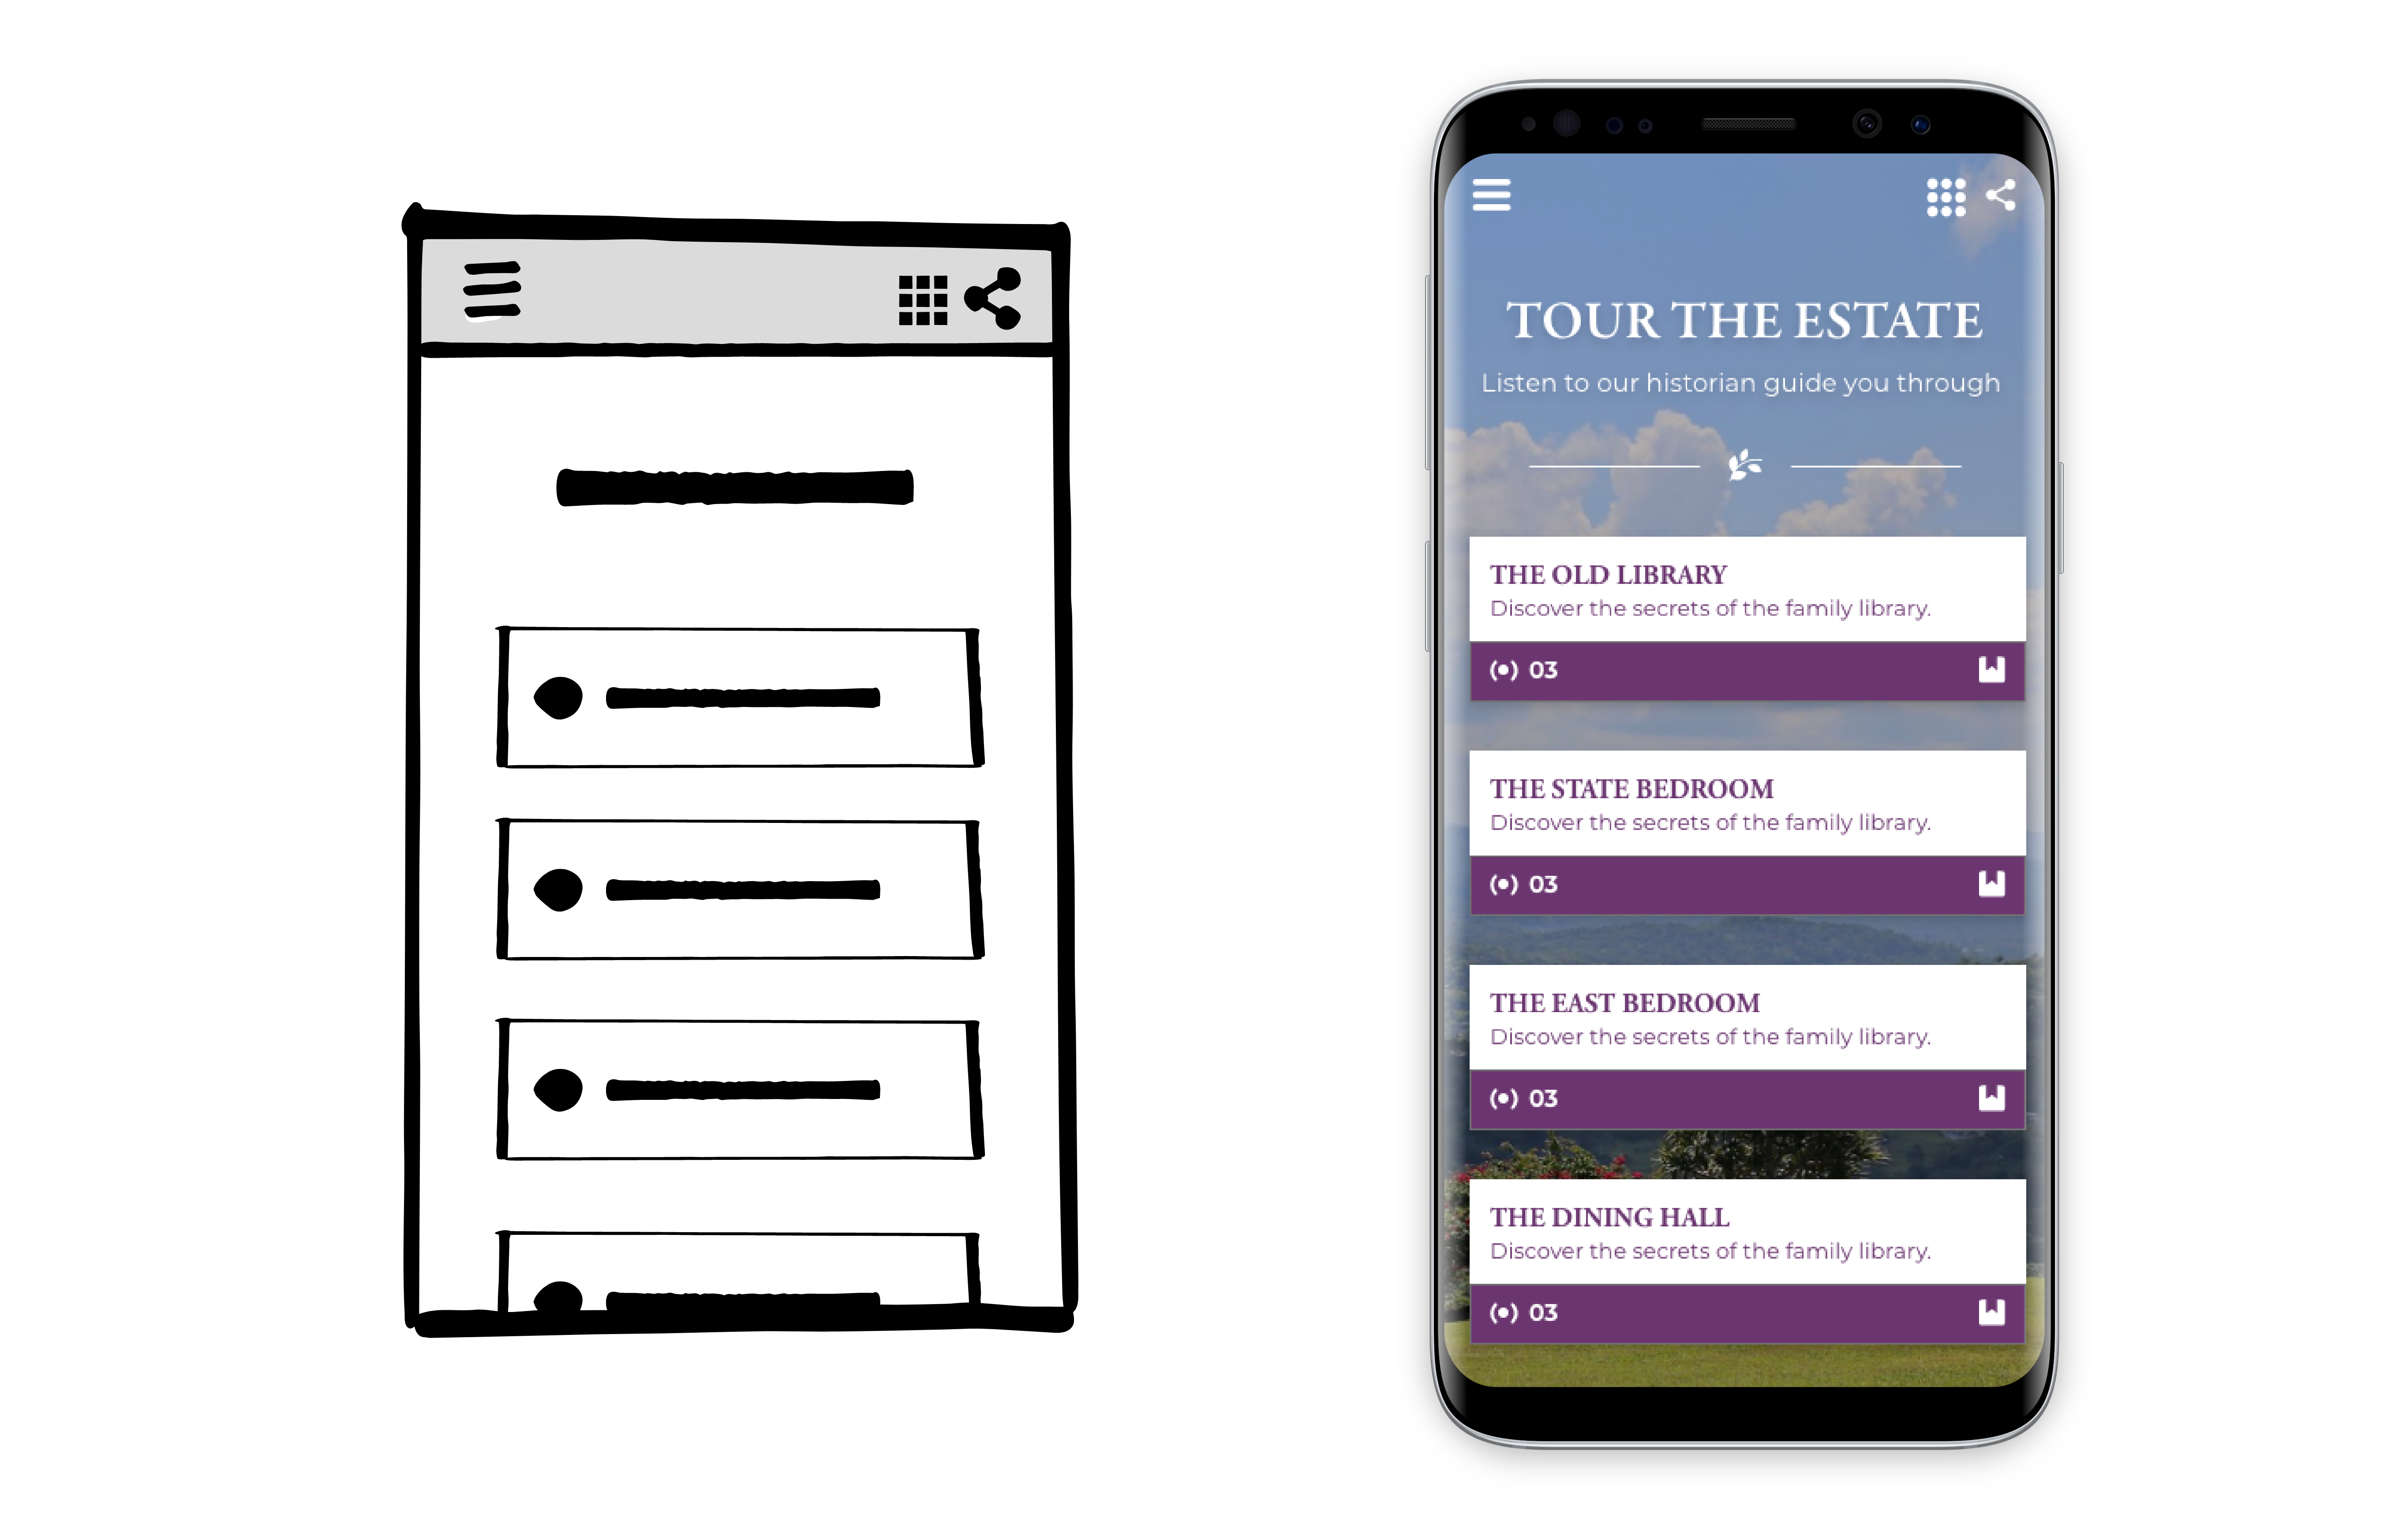 mobile apps wireframe examples